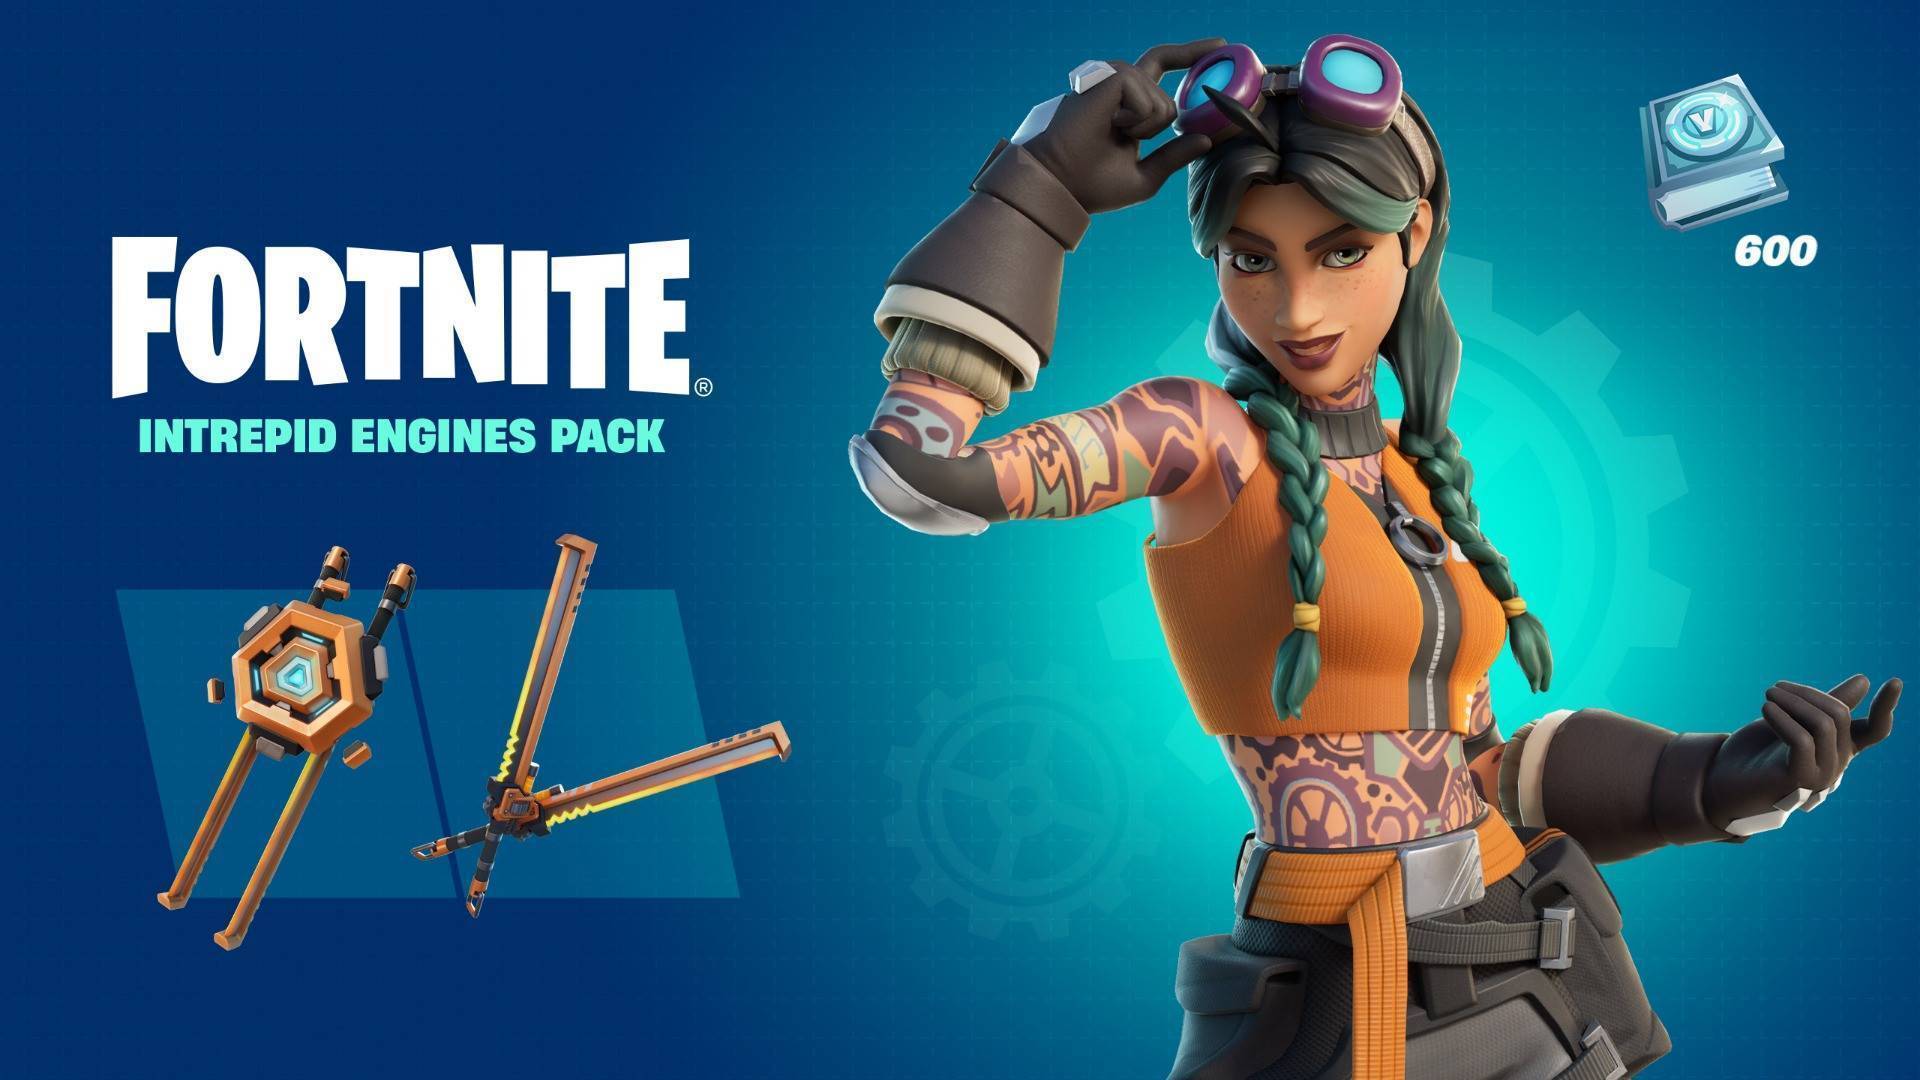 Fortnite Intrepid Engines Pack (XBOX ONE) cheap - Price of $13.98